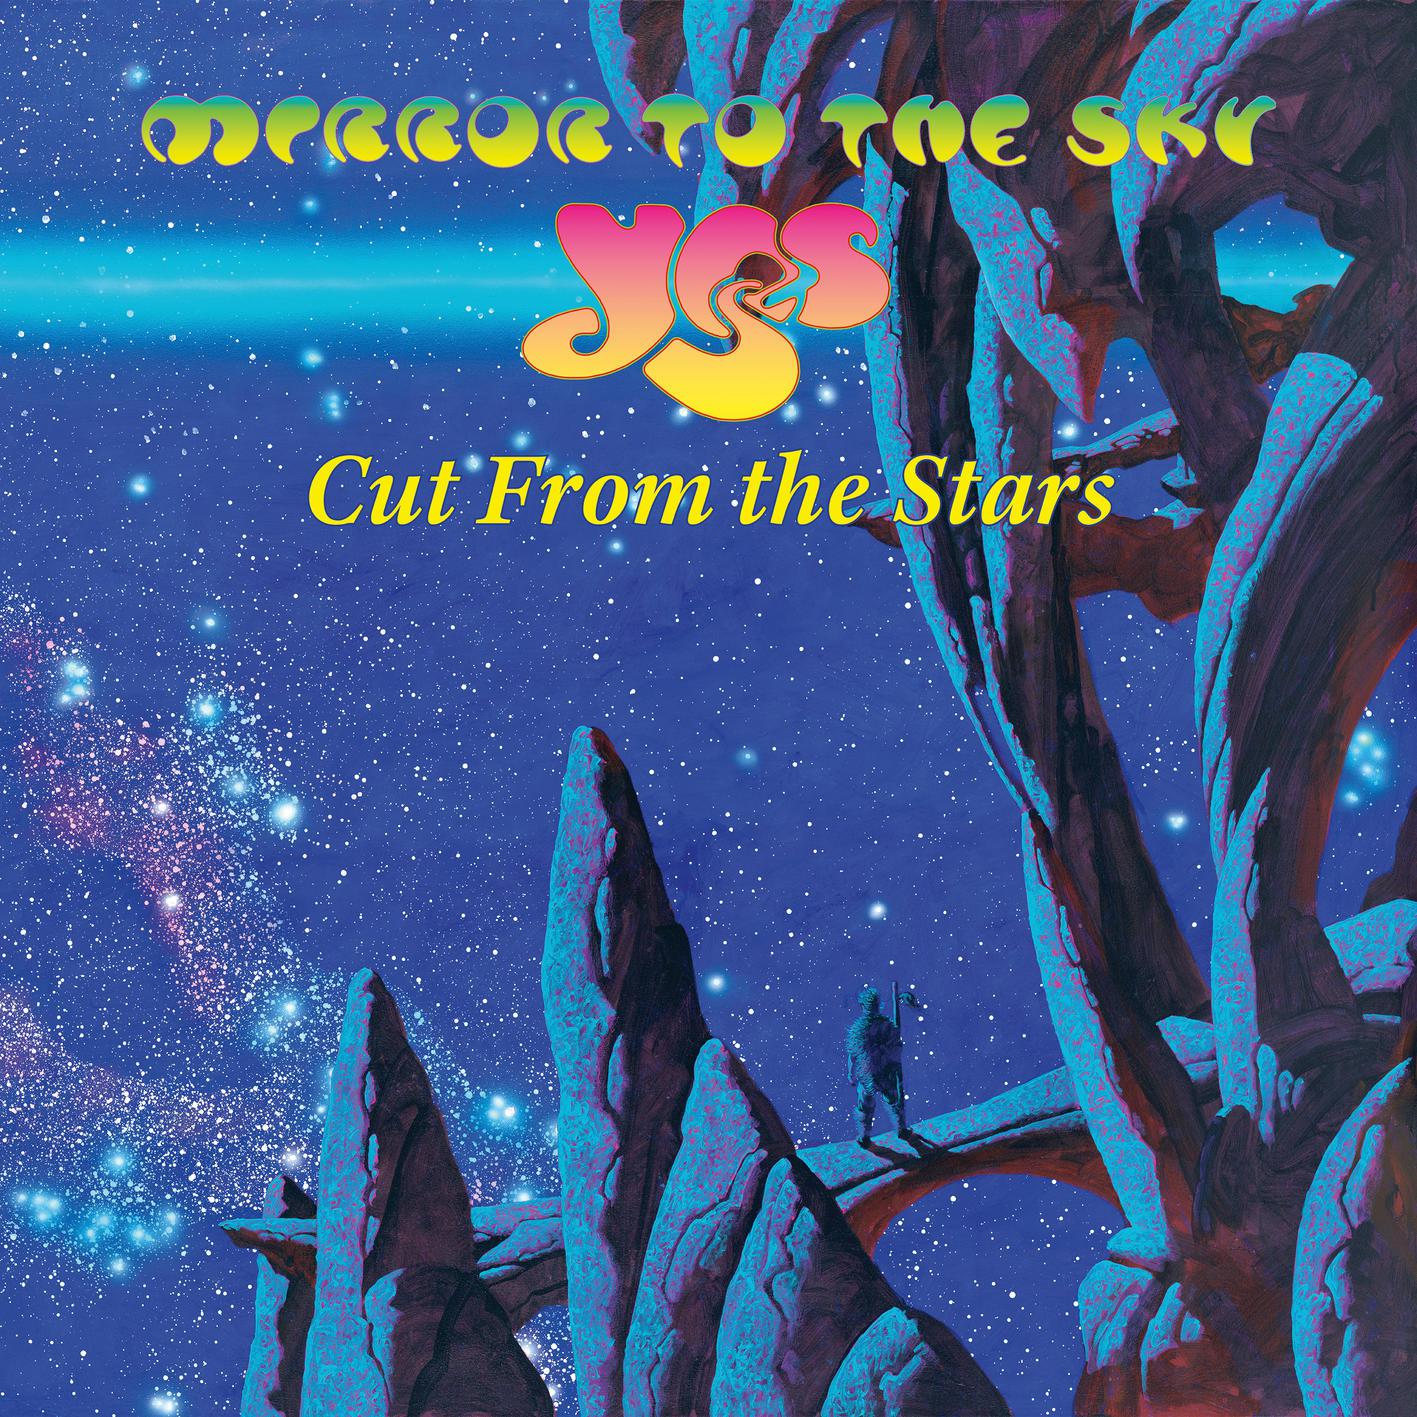 Yes - Cut from the Stars